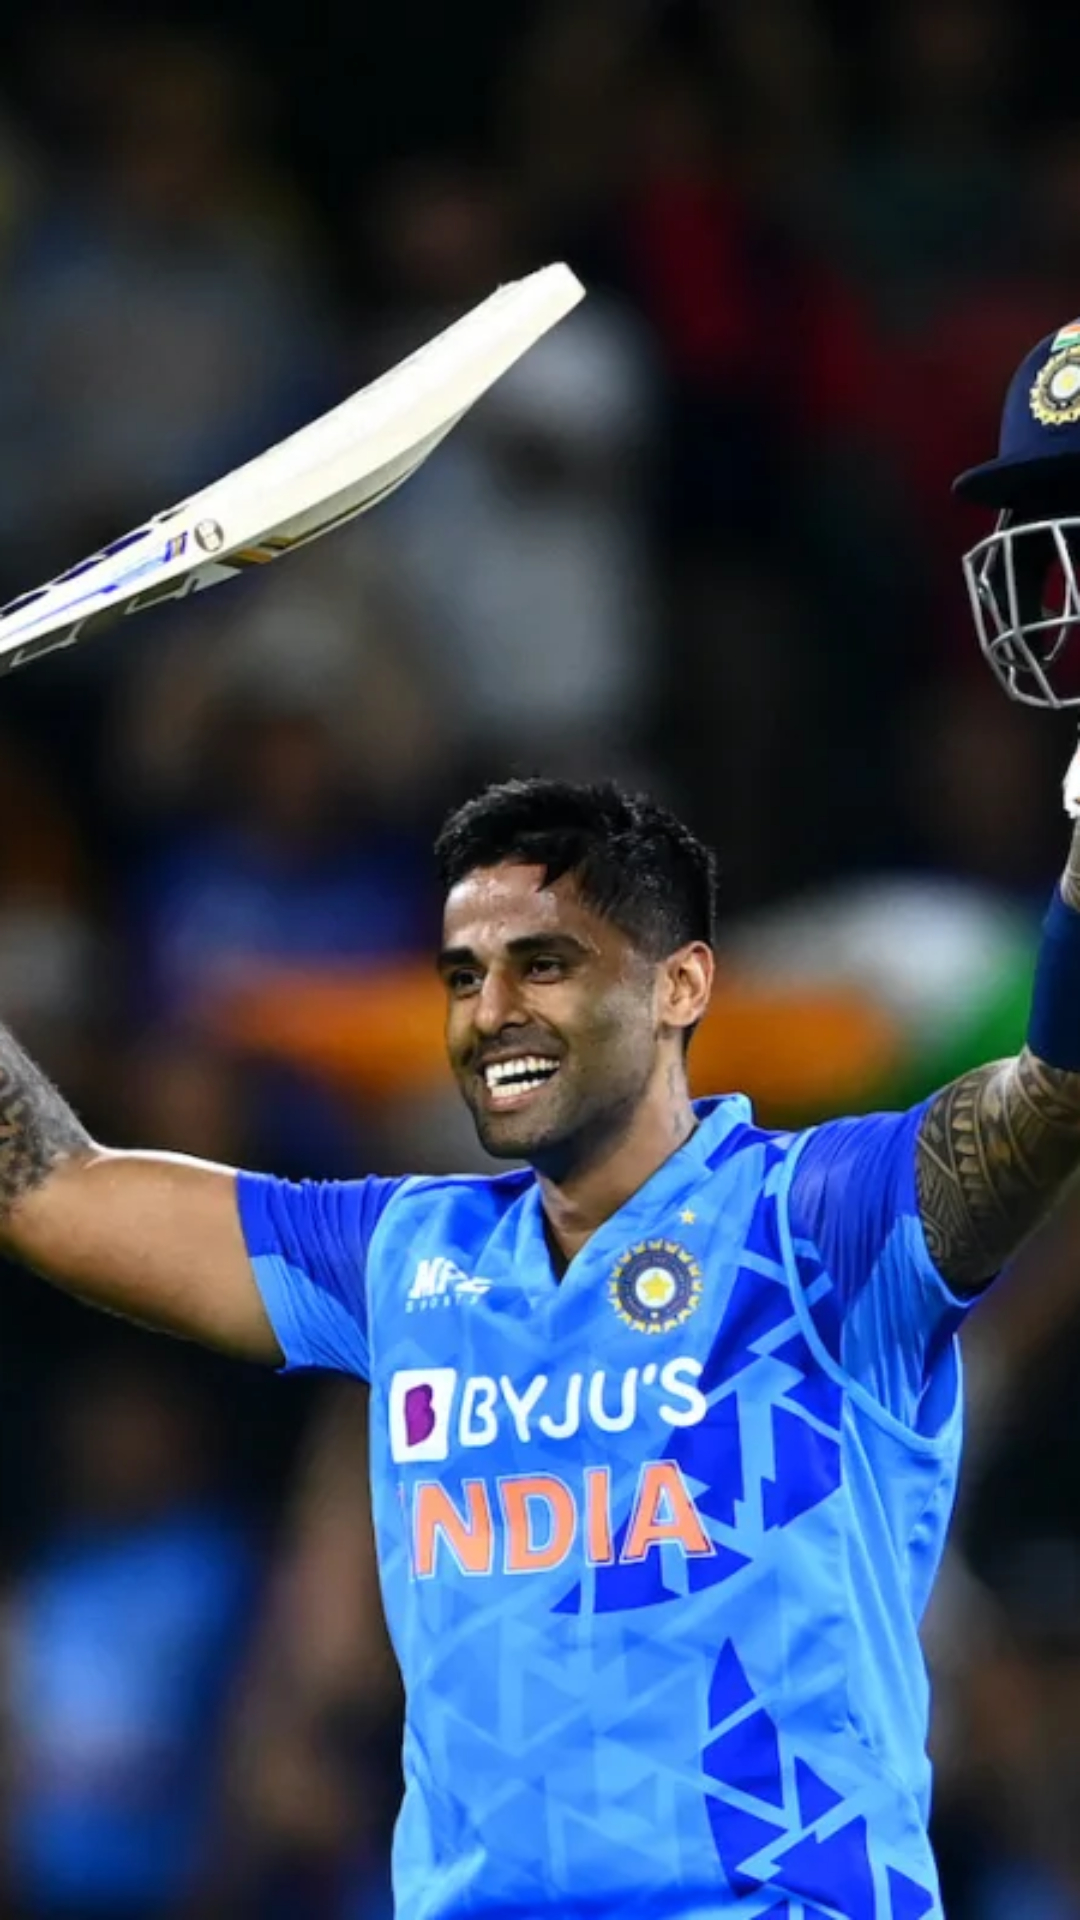 Here's looking at Suryakumar Yadav's record breaking T20I numbers in 2022